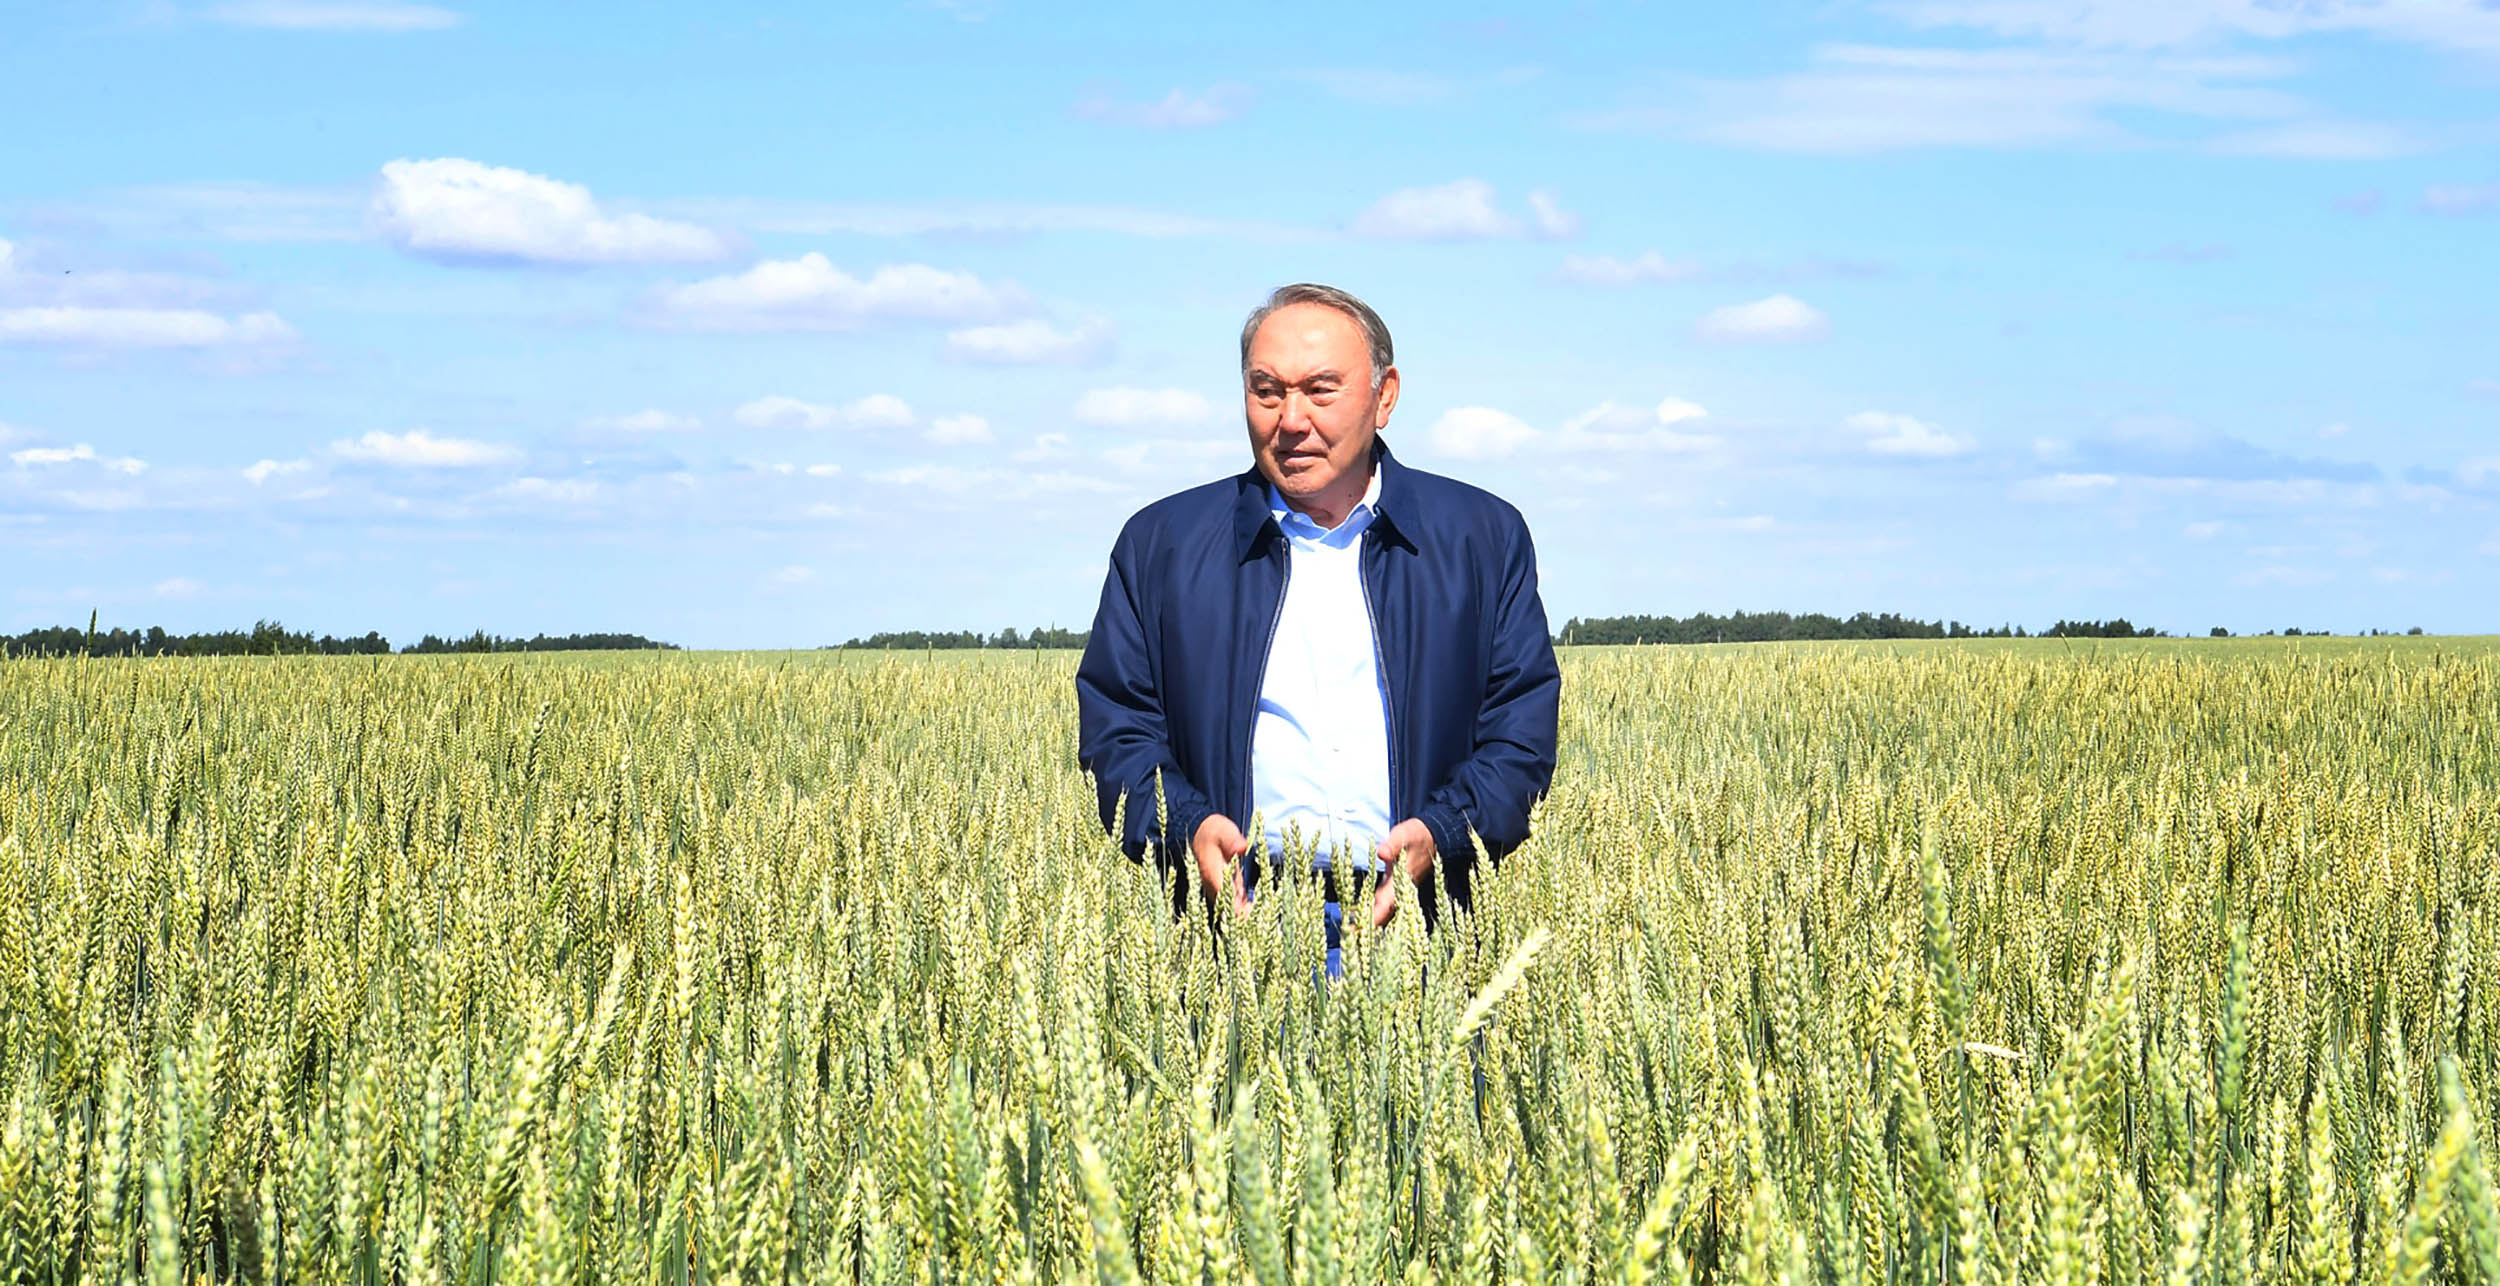 Kazakh President visits the agricultural complex of Eximnan Agrofirm LLP